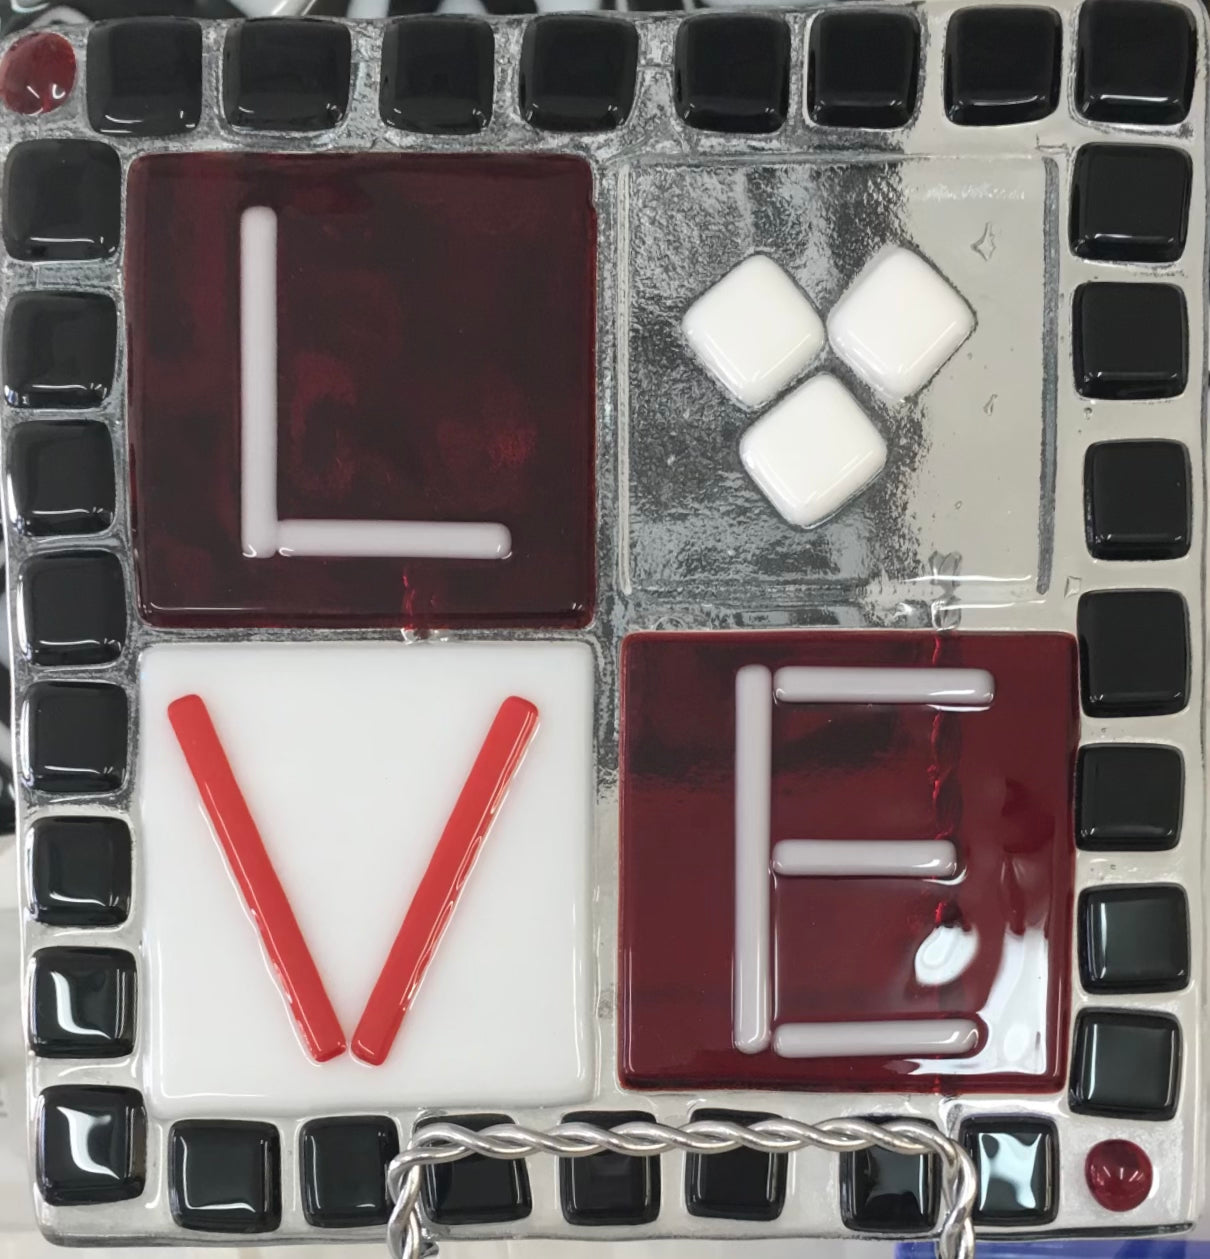 6" plate Fused glass, April 27, 3:00- 5:00